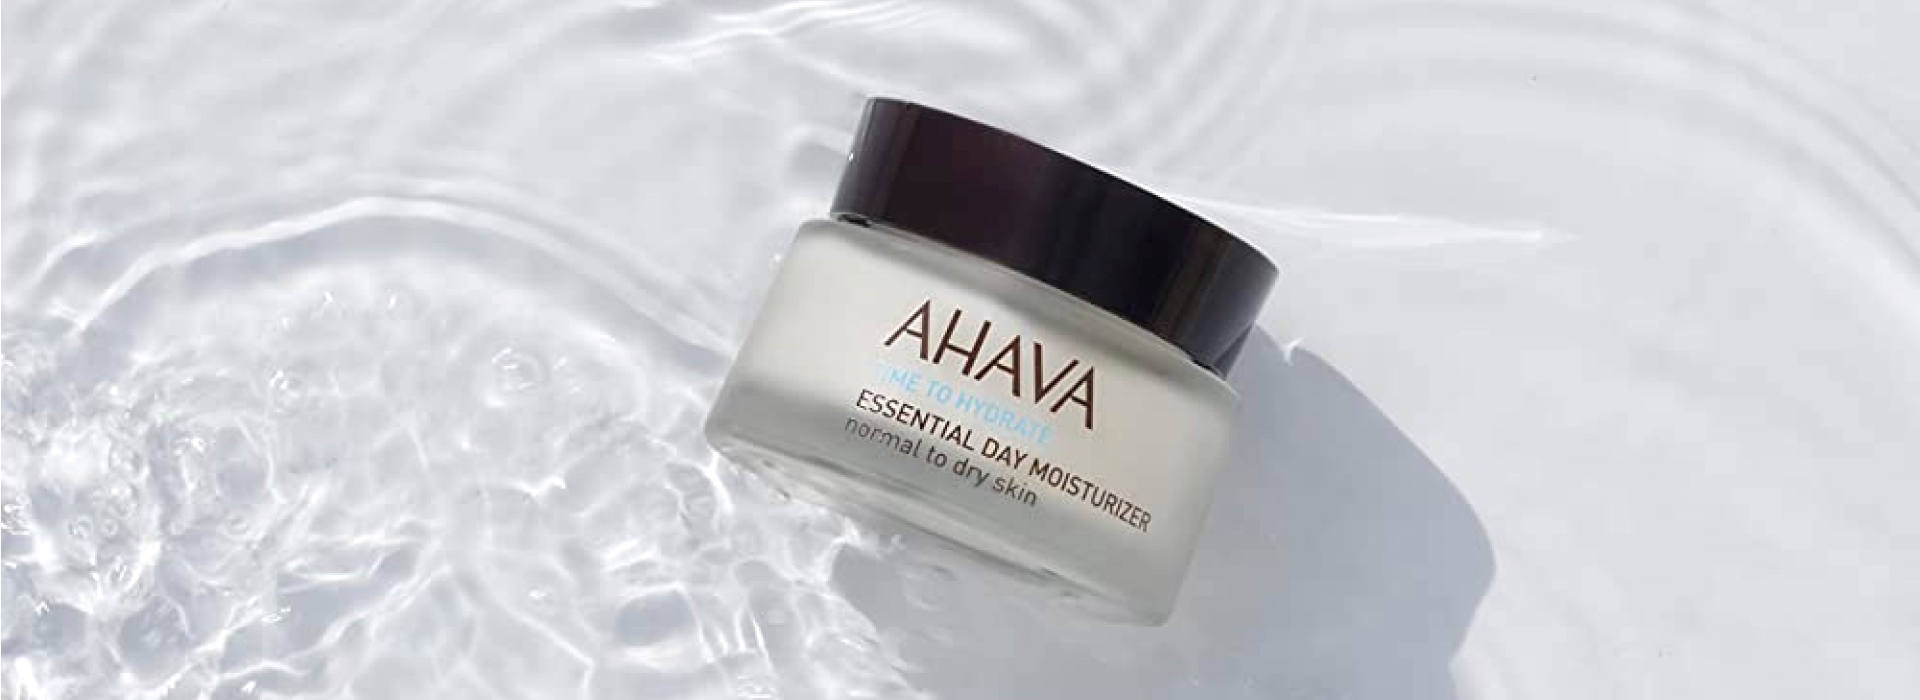 AHAVA - Time to Hydrate